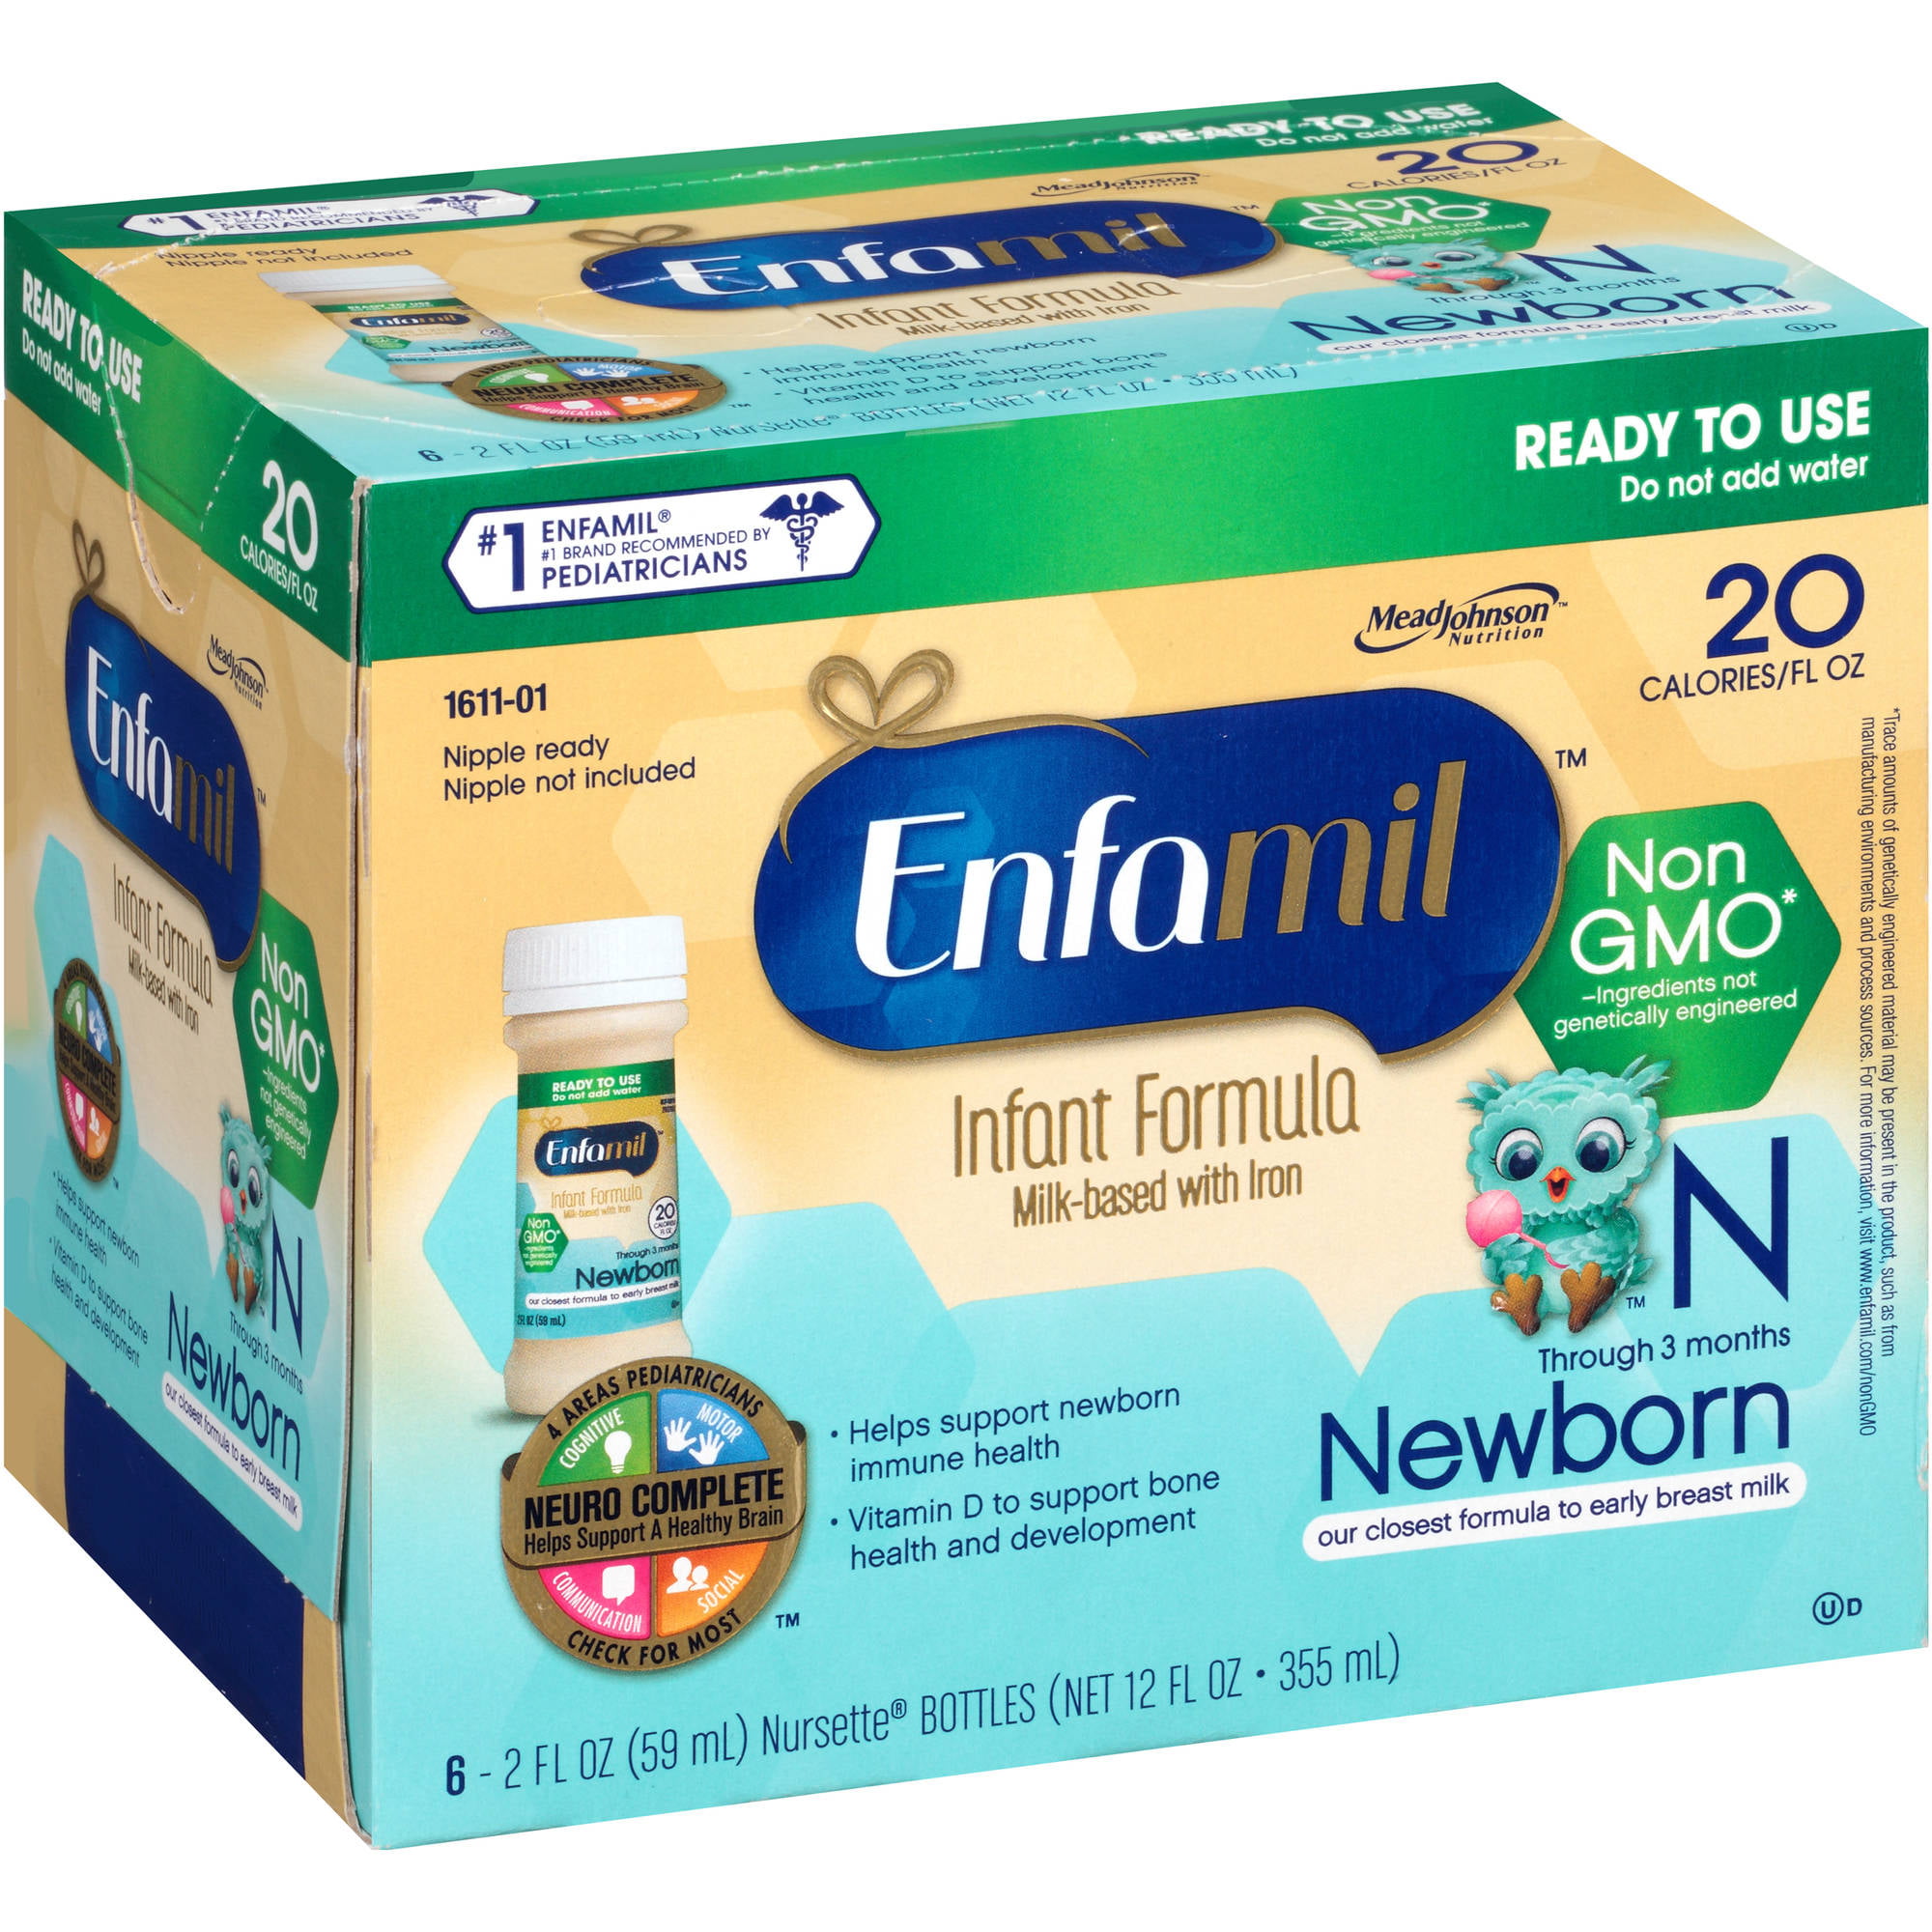 What are the ingredients in Enfamil Formula?